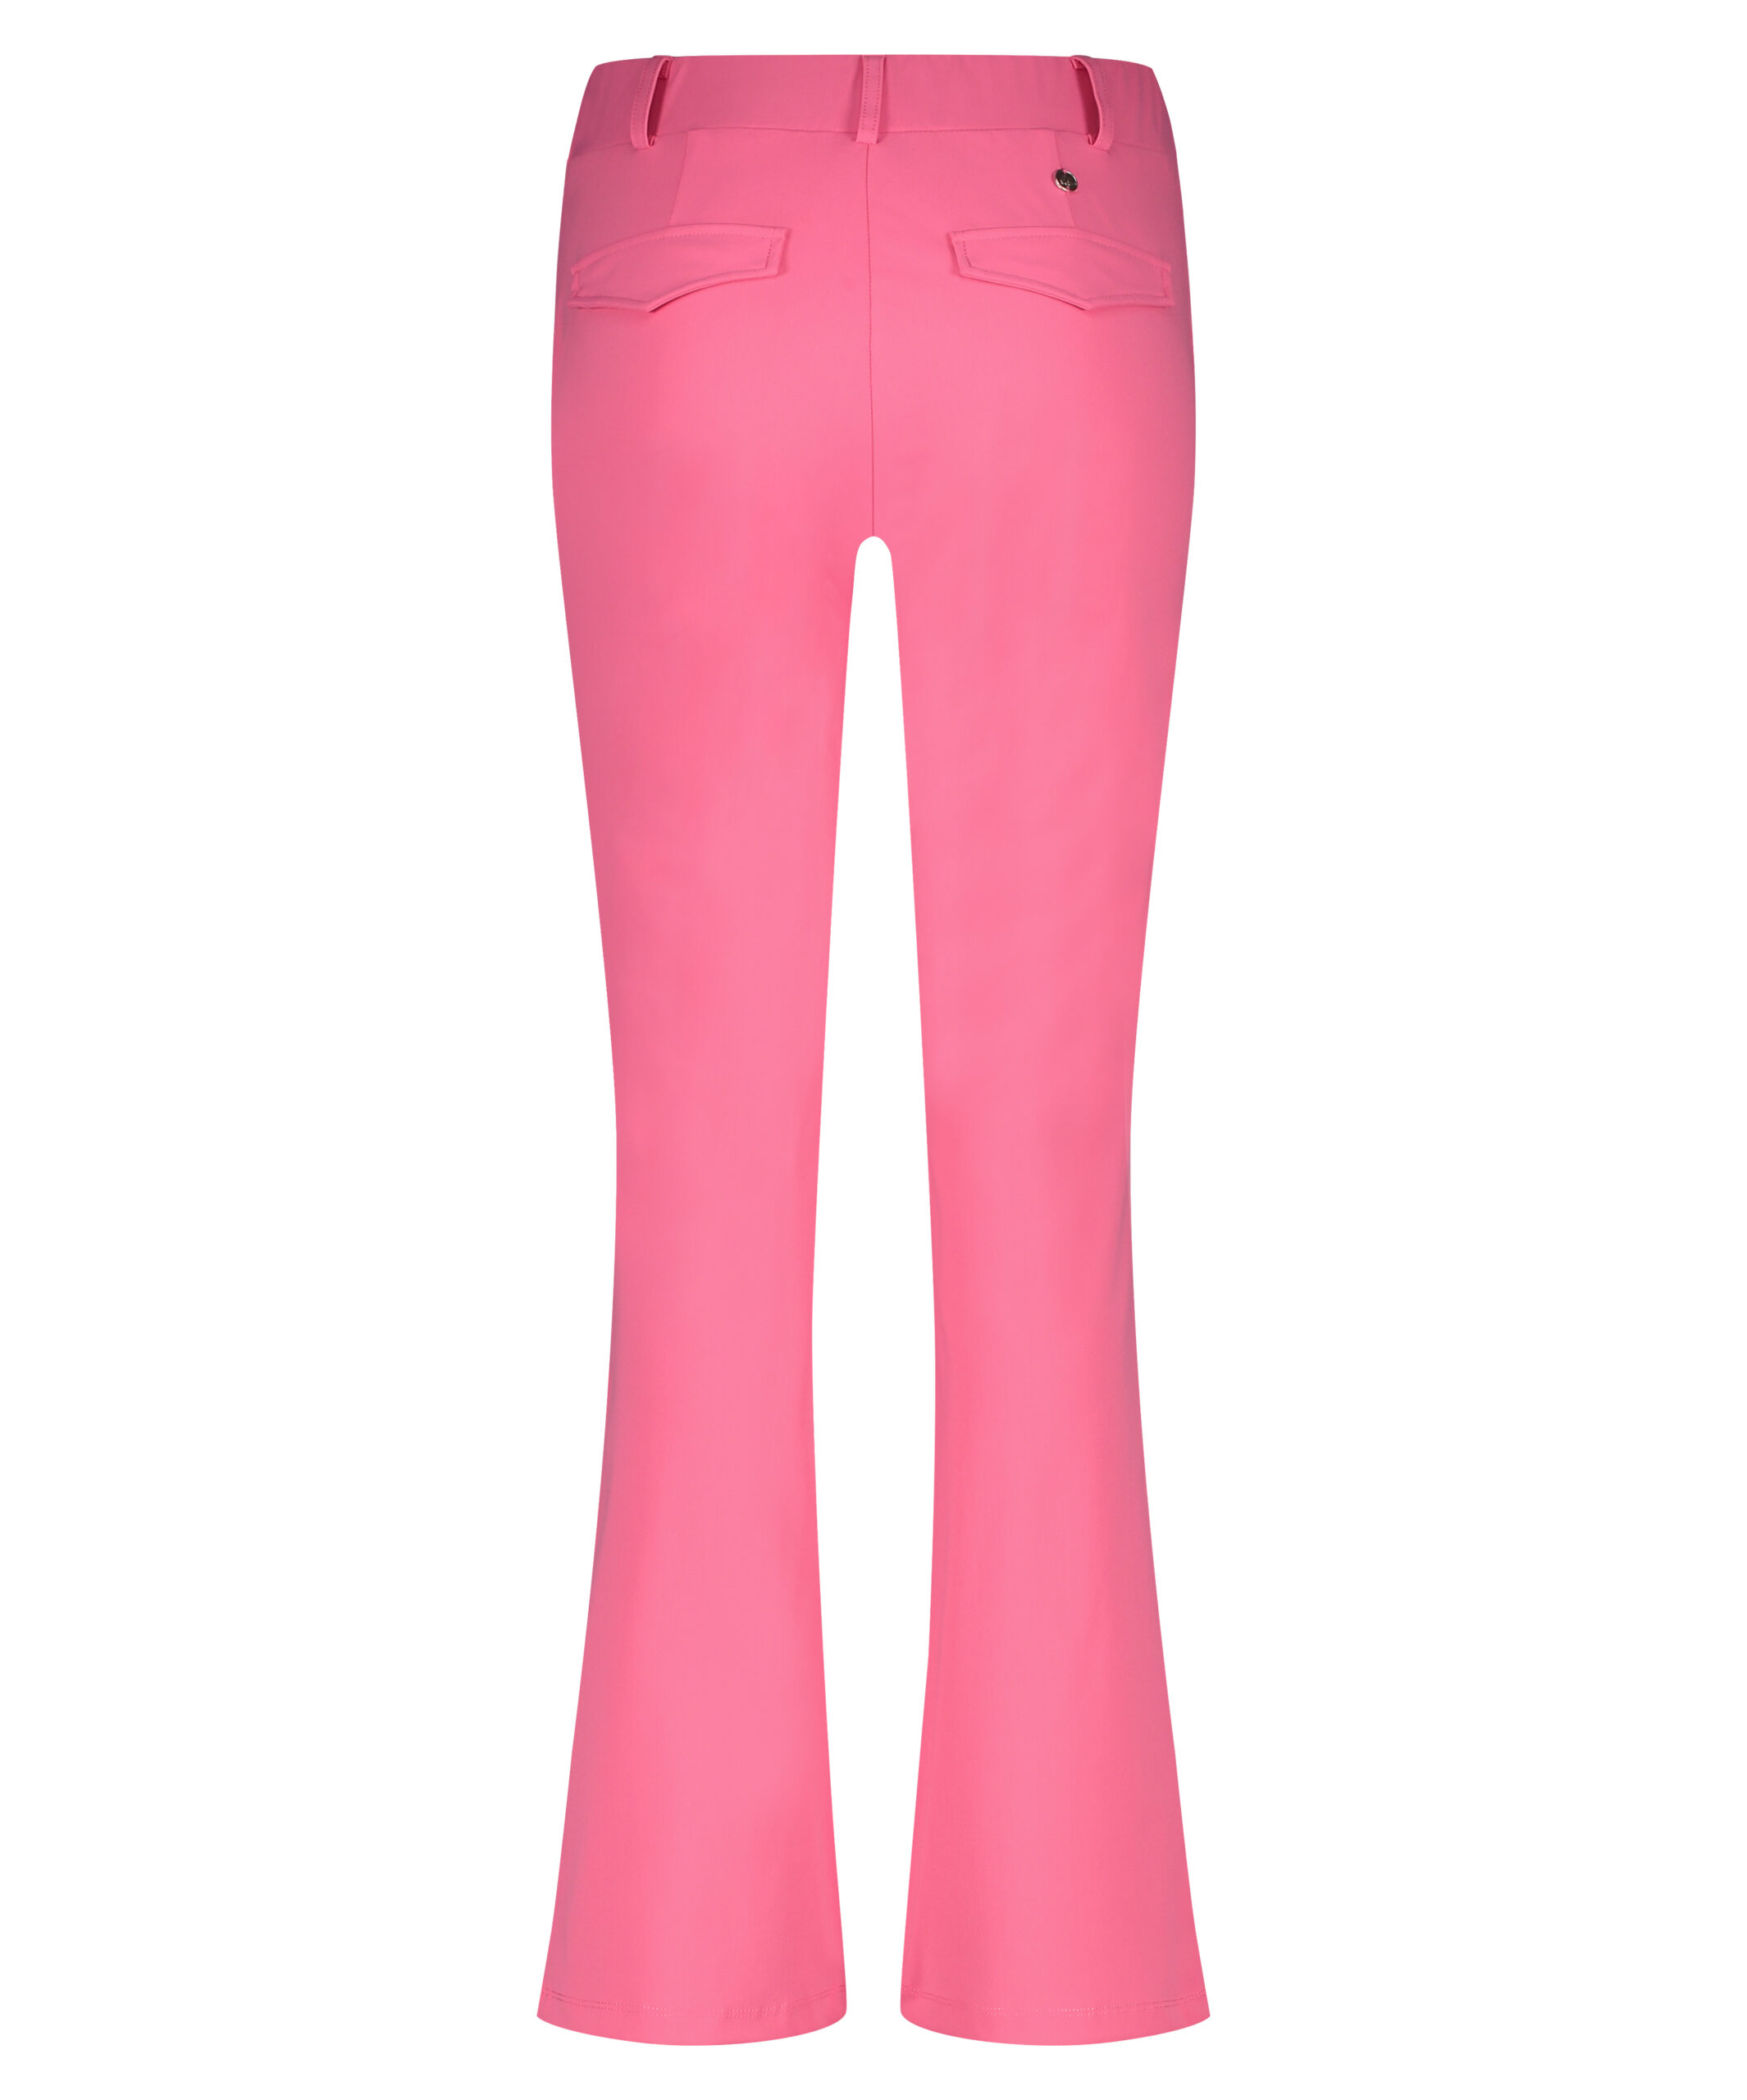 temperatuur dichters Lauw Lady Day - Poppy Flared - Hot Pink - Comfortabele travelstof